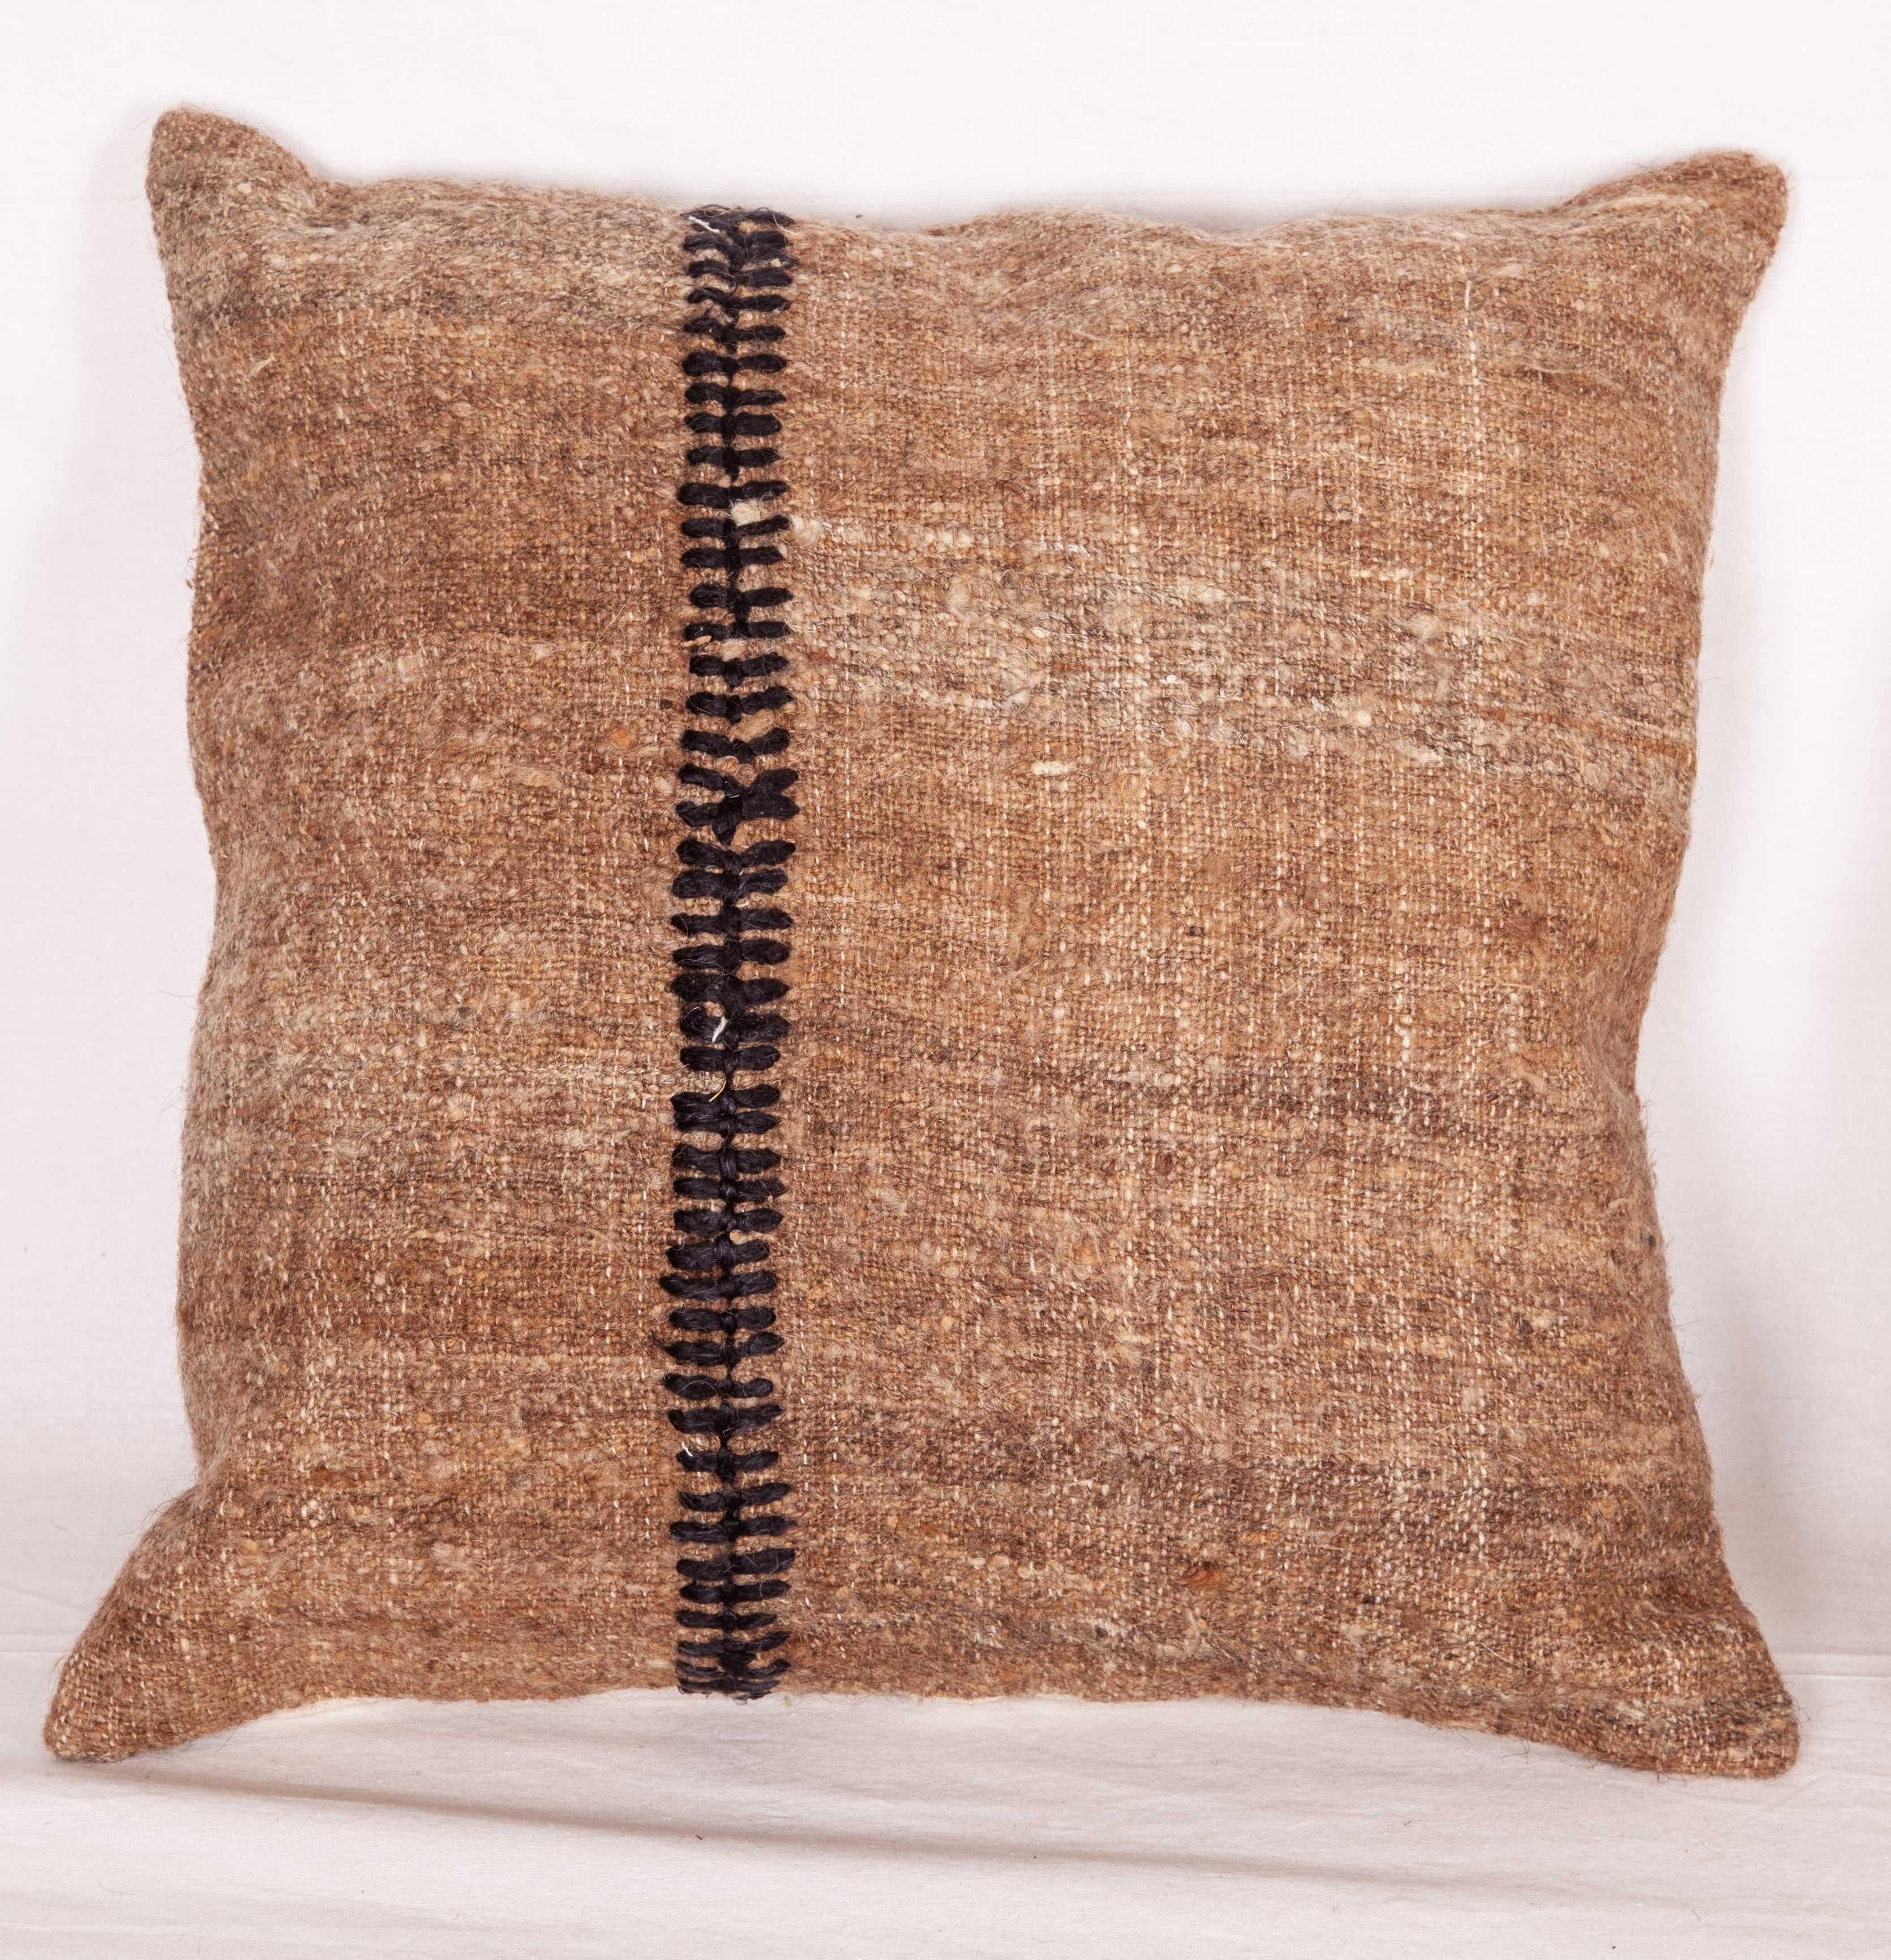 Hand-Woven Pillow Cases Fashioned from a Mid-20th Century Anatolian Neutral Kilim